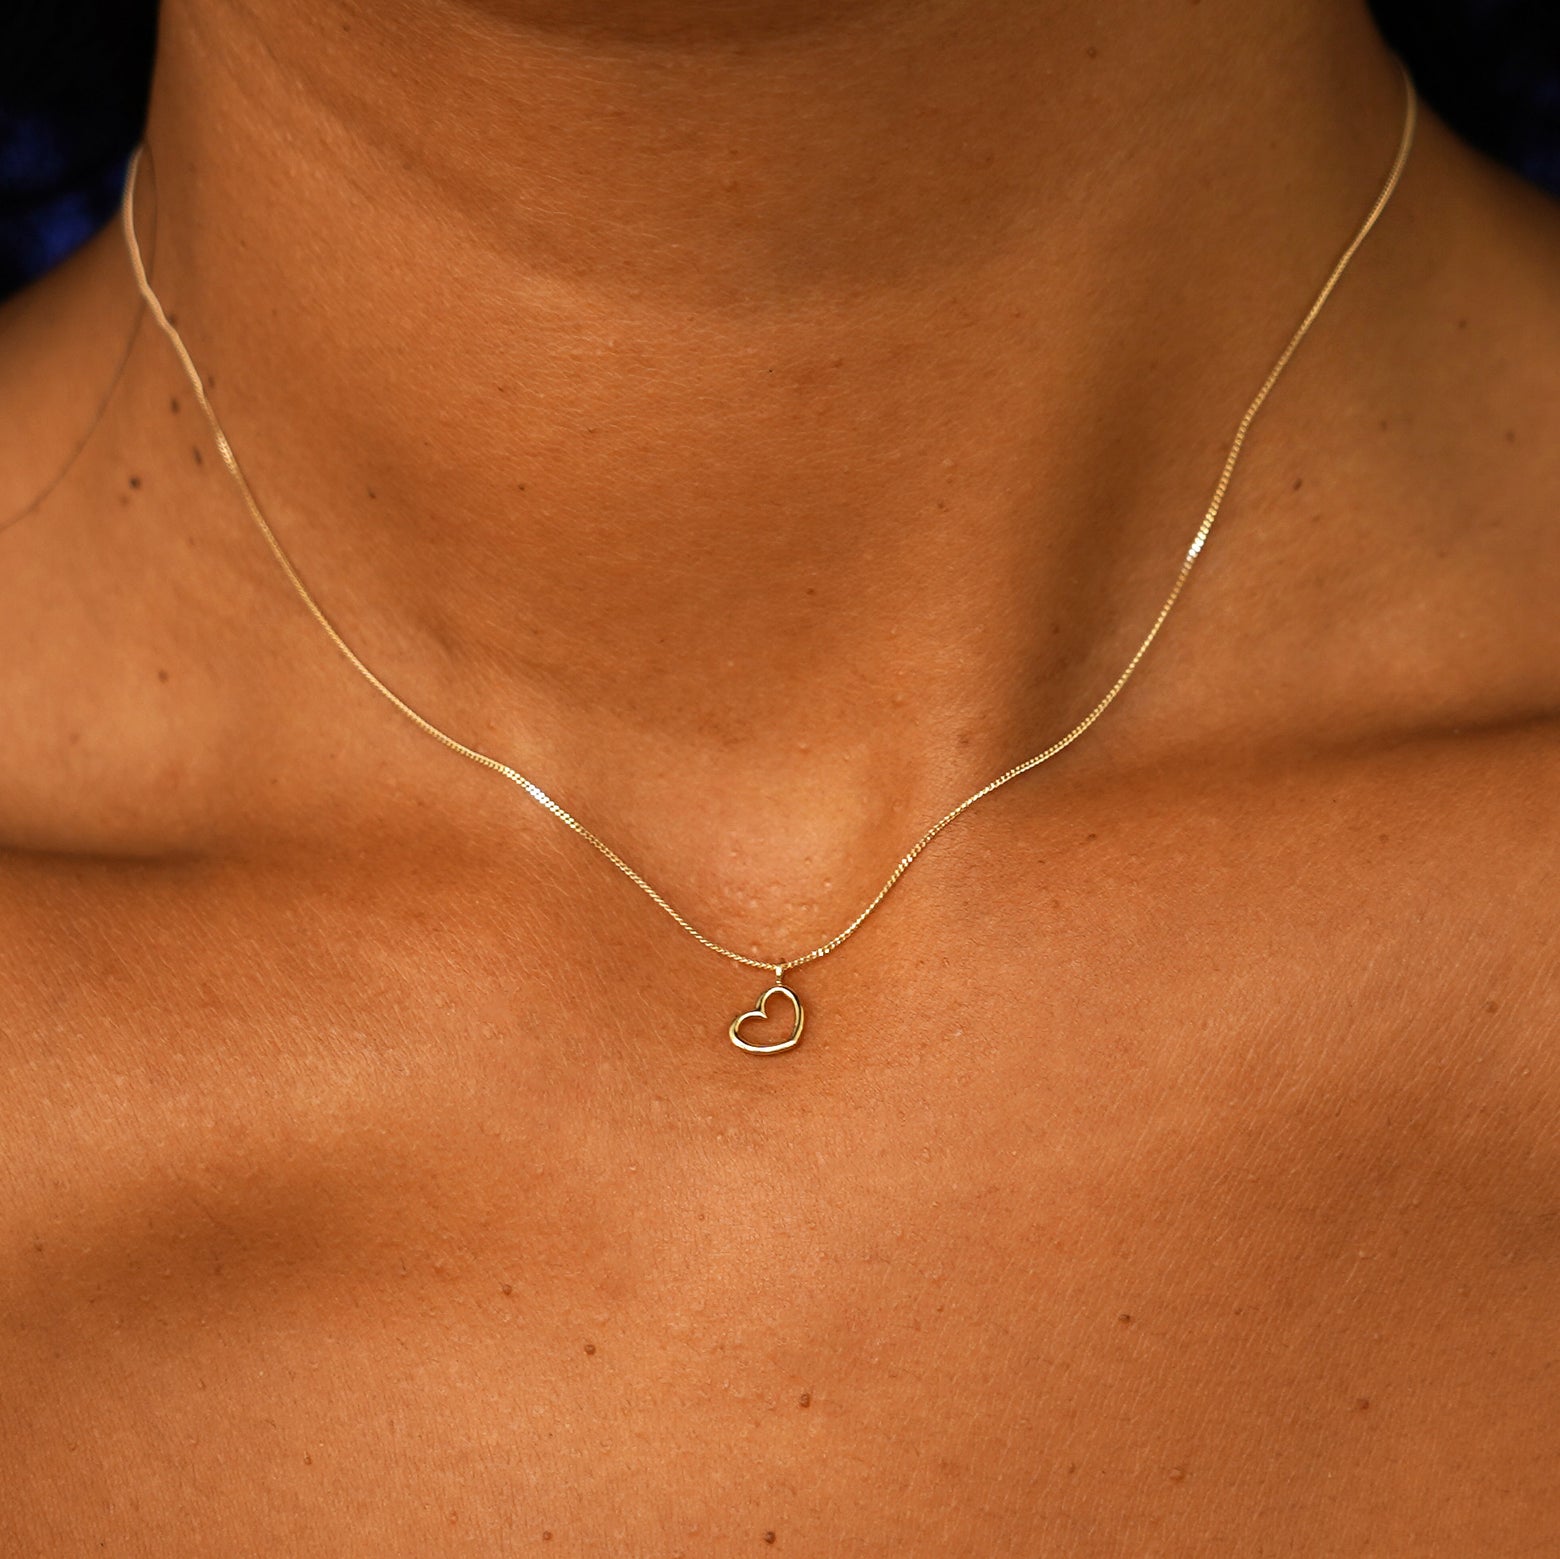 Close up view of a model's neck wearing a solid yellow gold Heart Necklace